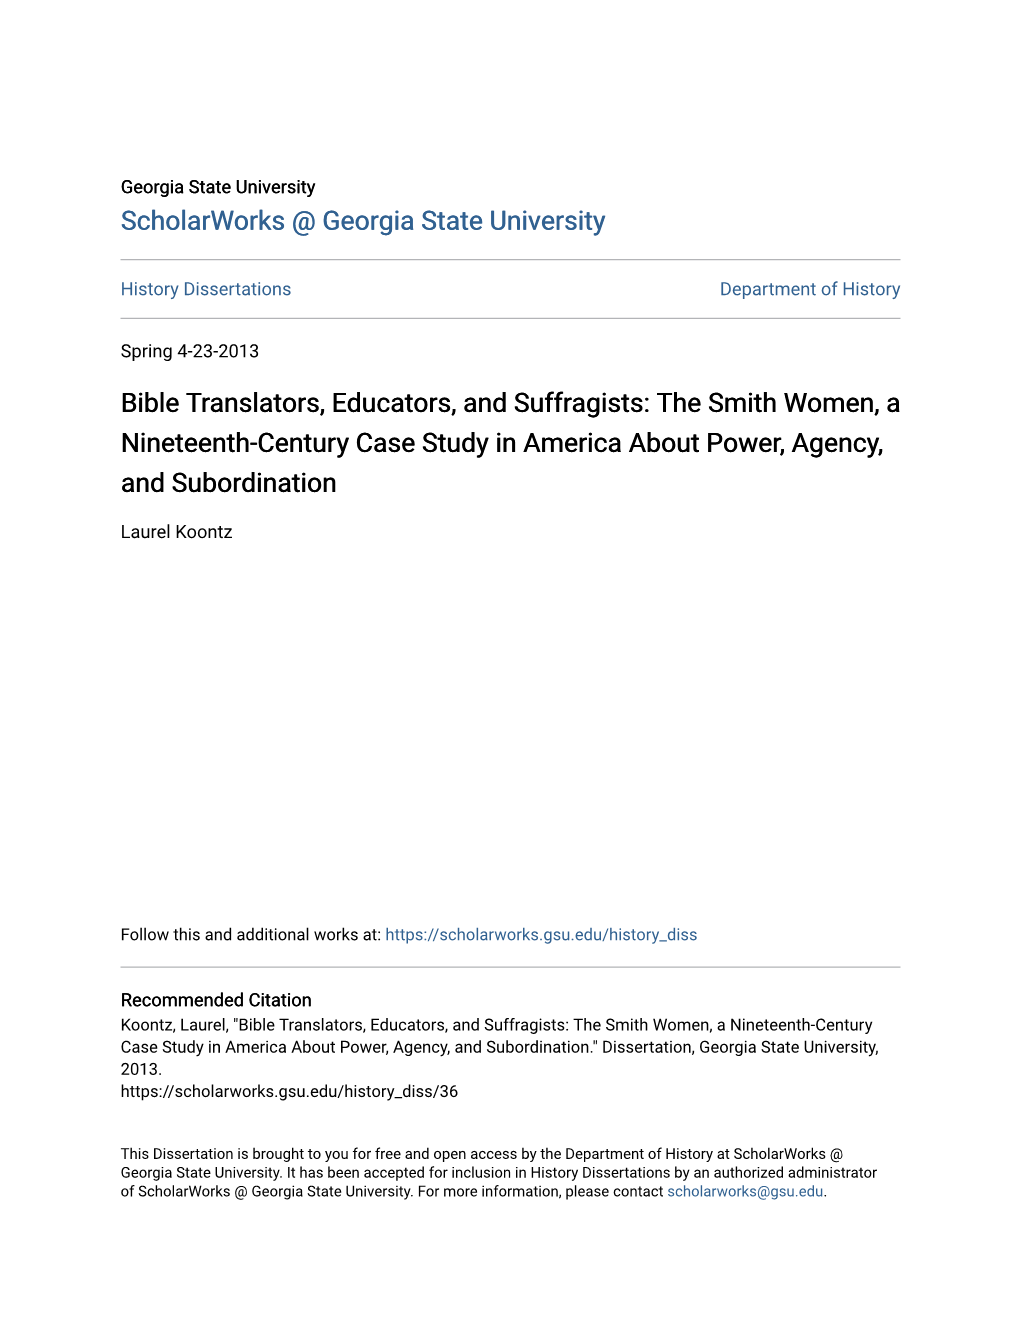 Bible Translators, Educators, and Suffragists: the Smith Women, a Nineteenth-Century Case Study in America About Power, Agency, and Subordination